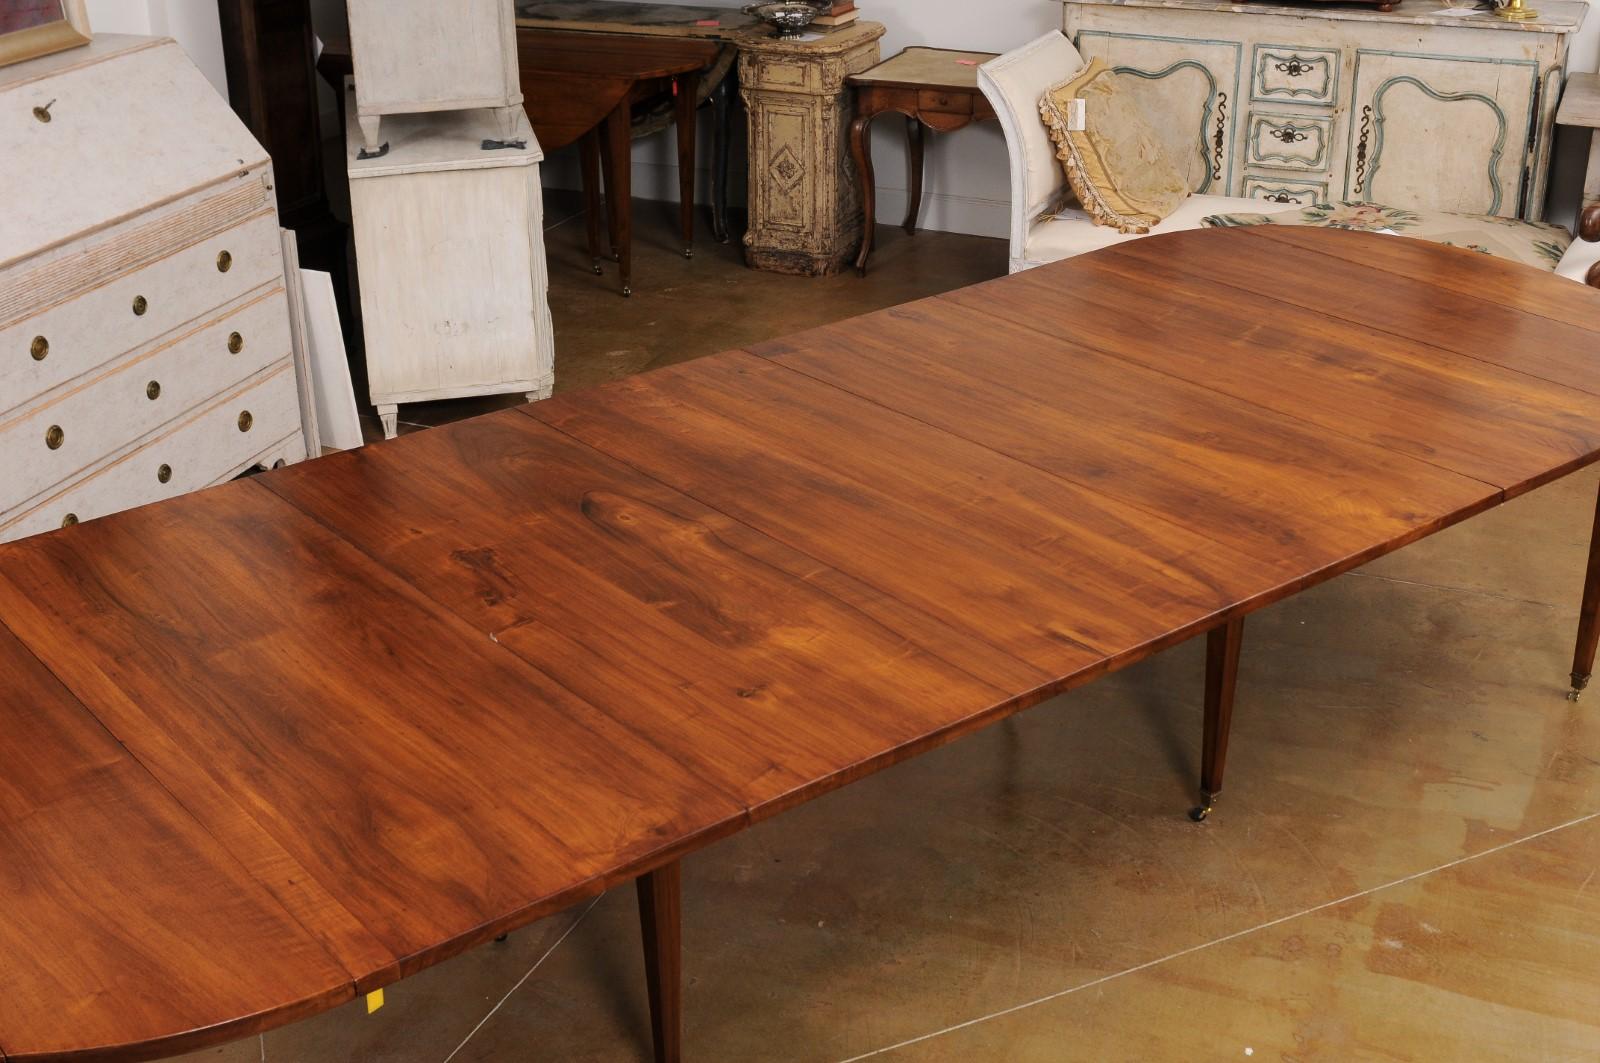 A French walnut oval shaped extension dining room table from the late 19th century, with five leaves, tapered legs and mounted on casters. Created in France during the last quarter of the 19th century, this French dining room table features a walnut